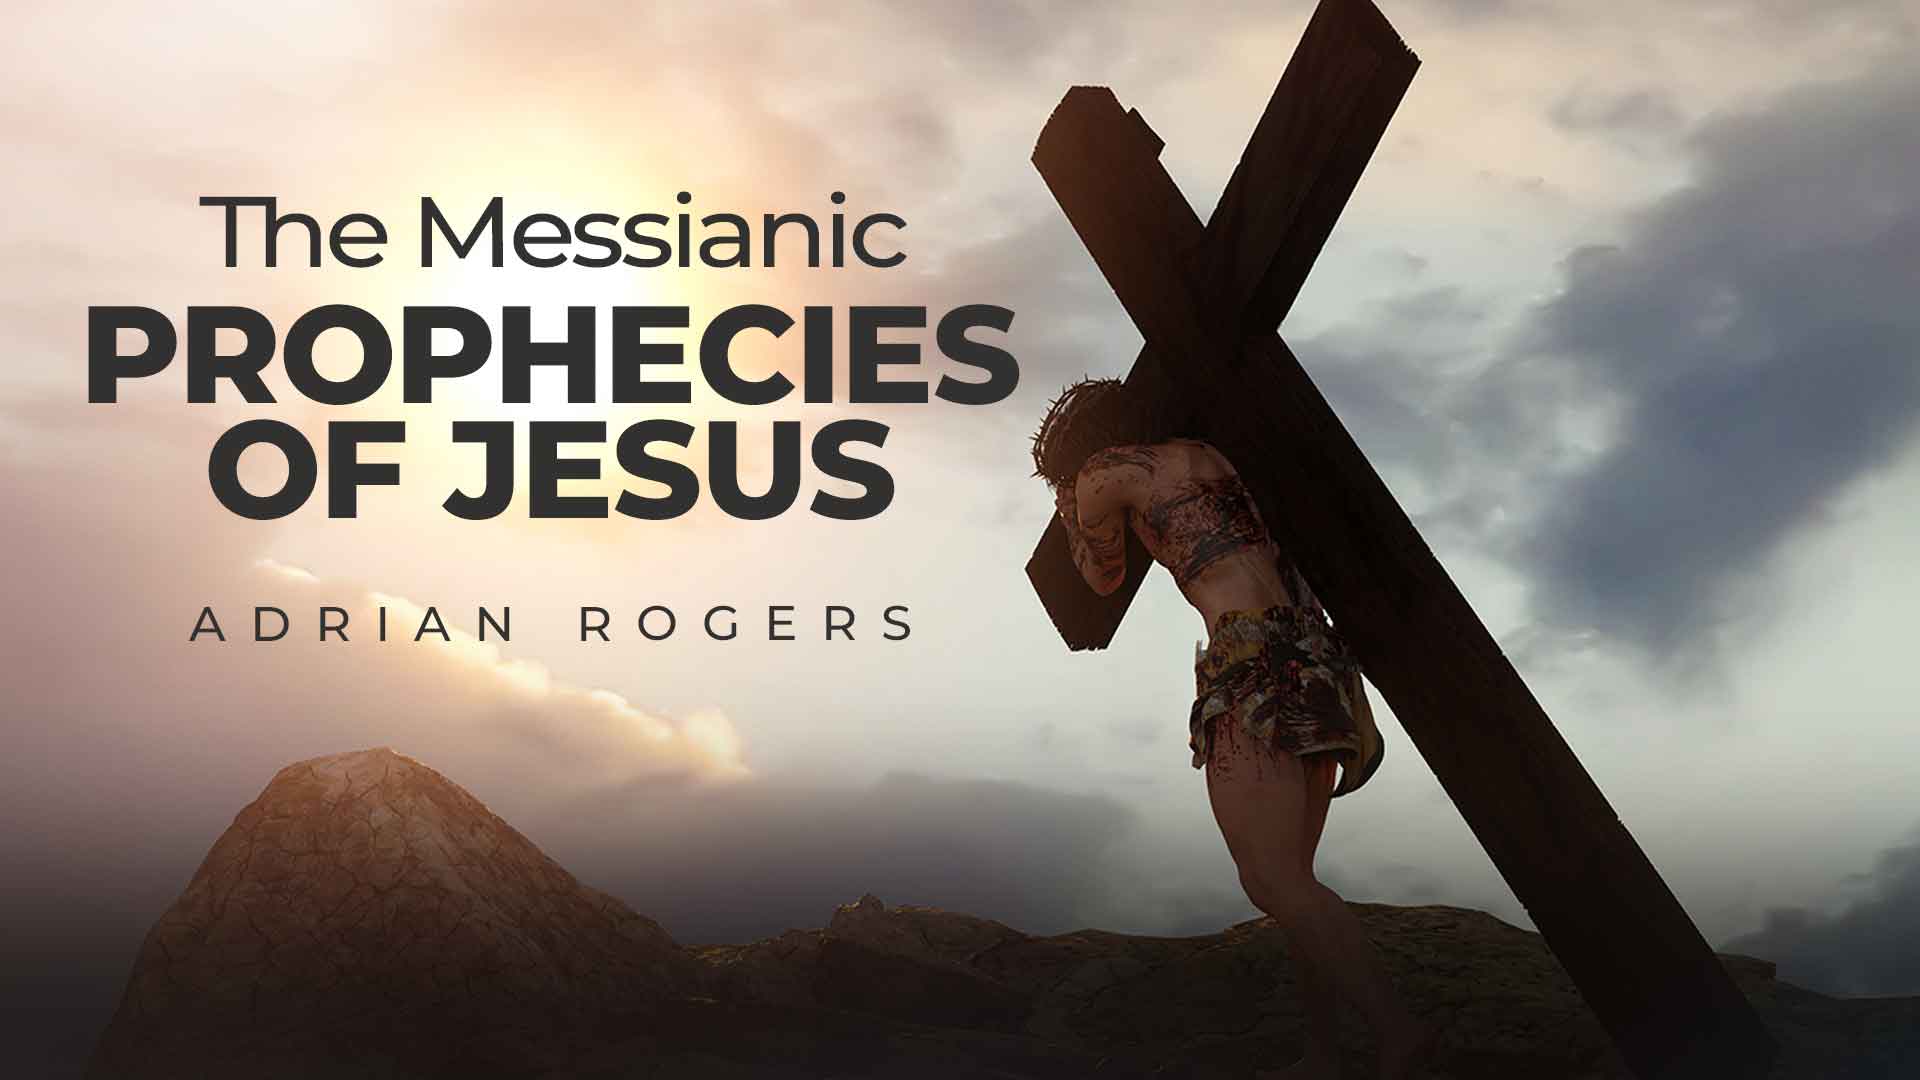 The Messianic Prophecies of Jesus 1920x1080 Article Image